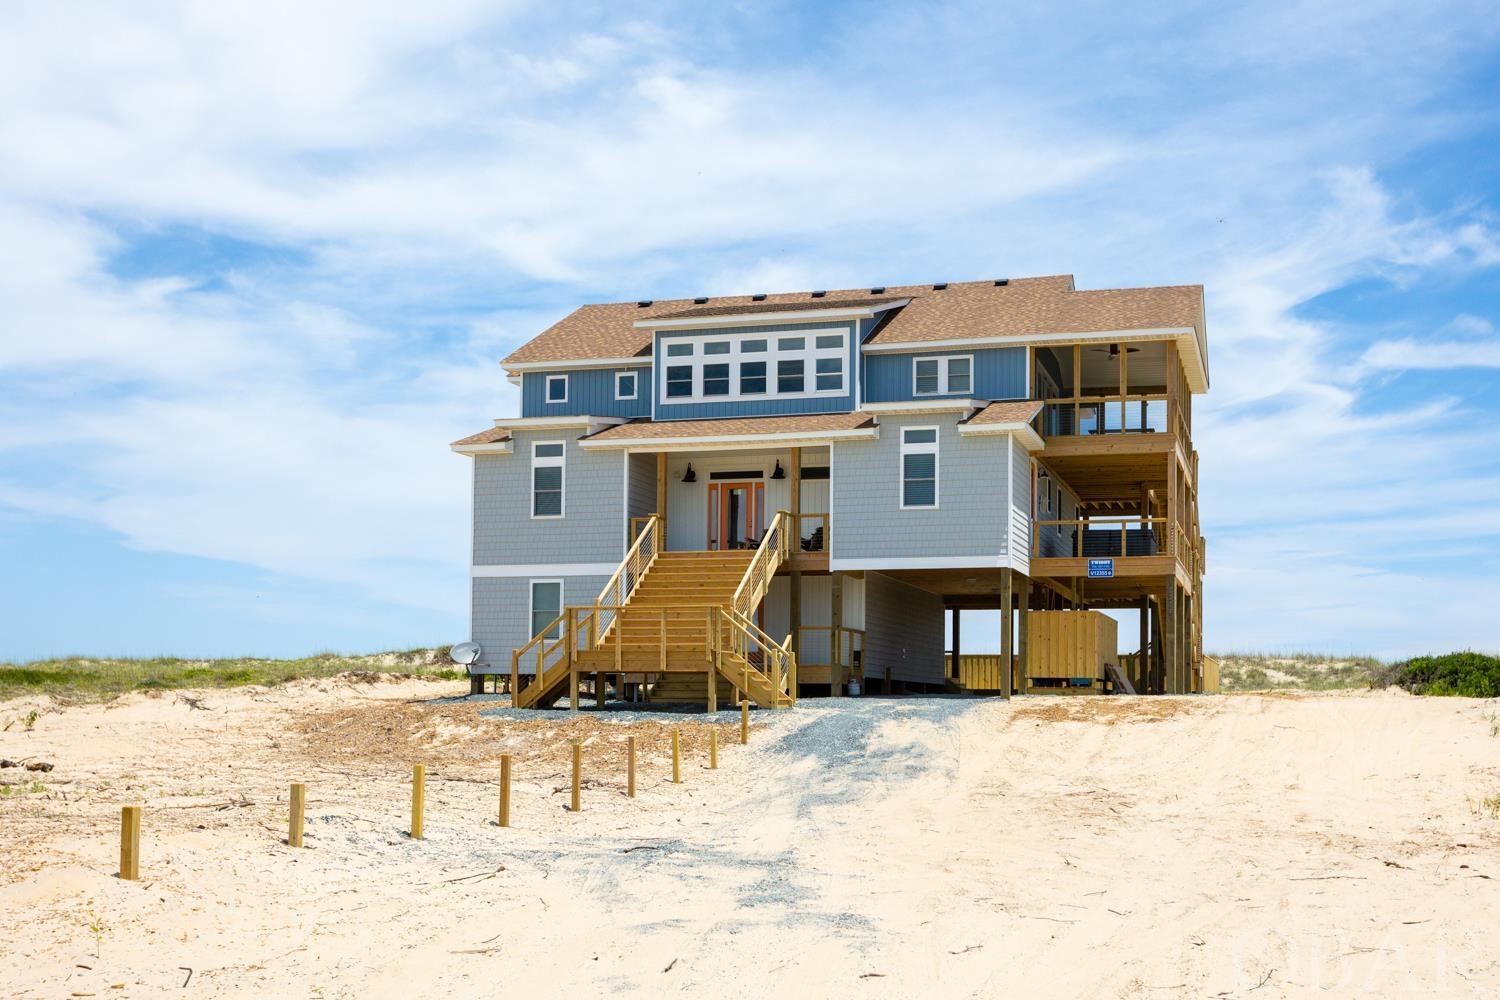 Approximately 10.3 miles up the beach. This high end new construction 6BR/6.5BA oceanfront is spectacular!  After a day of fun in the sun, relax and unwind at Apres Sea! Located oceanfront in Carova on the 4x4 beach, you’ll find secluded solitude. The ocean backdrop is present from the oversized decks that feature wire railings for picturesque views.  Level three of the home features an open-concept kitchen with two dishwashers and two refrigerators. The living area overlooks the ocean and provides a cozy place to gather with family around the electric fireplace on cool evenings. A spacious dining area can be found both indoors and in the screened-in portion of the deck. The master bedroom boasts a grand soaking tub and a sitting area overlooking the ocean. Four master bedrooms on level two all have deck access so you can enjoy the sea breeze from any level of the home. The hot tub is located on the covered deck so you have a warm and relaxing place to take in the scenery during any type of weather. Level one provides a space for entertainment from the theater room with tiered seating, to the rec room that features a pool table and bar!  The fun continues outside to the pool area that’s outfitted with an outdoor bar perfect for poolside cocktails. The backyard space has its own outdoor bathroom with a shower so you don't have to miss a minute of sunshine. Apres Sea provides the ultimate place to relax and keep the good times rolling from beach days to nights at the pool and everywhere in between!